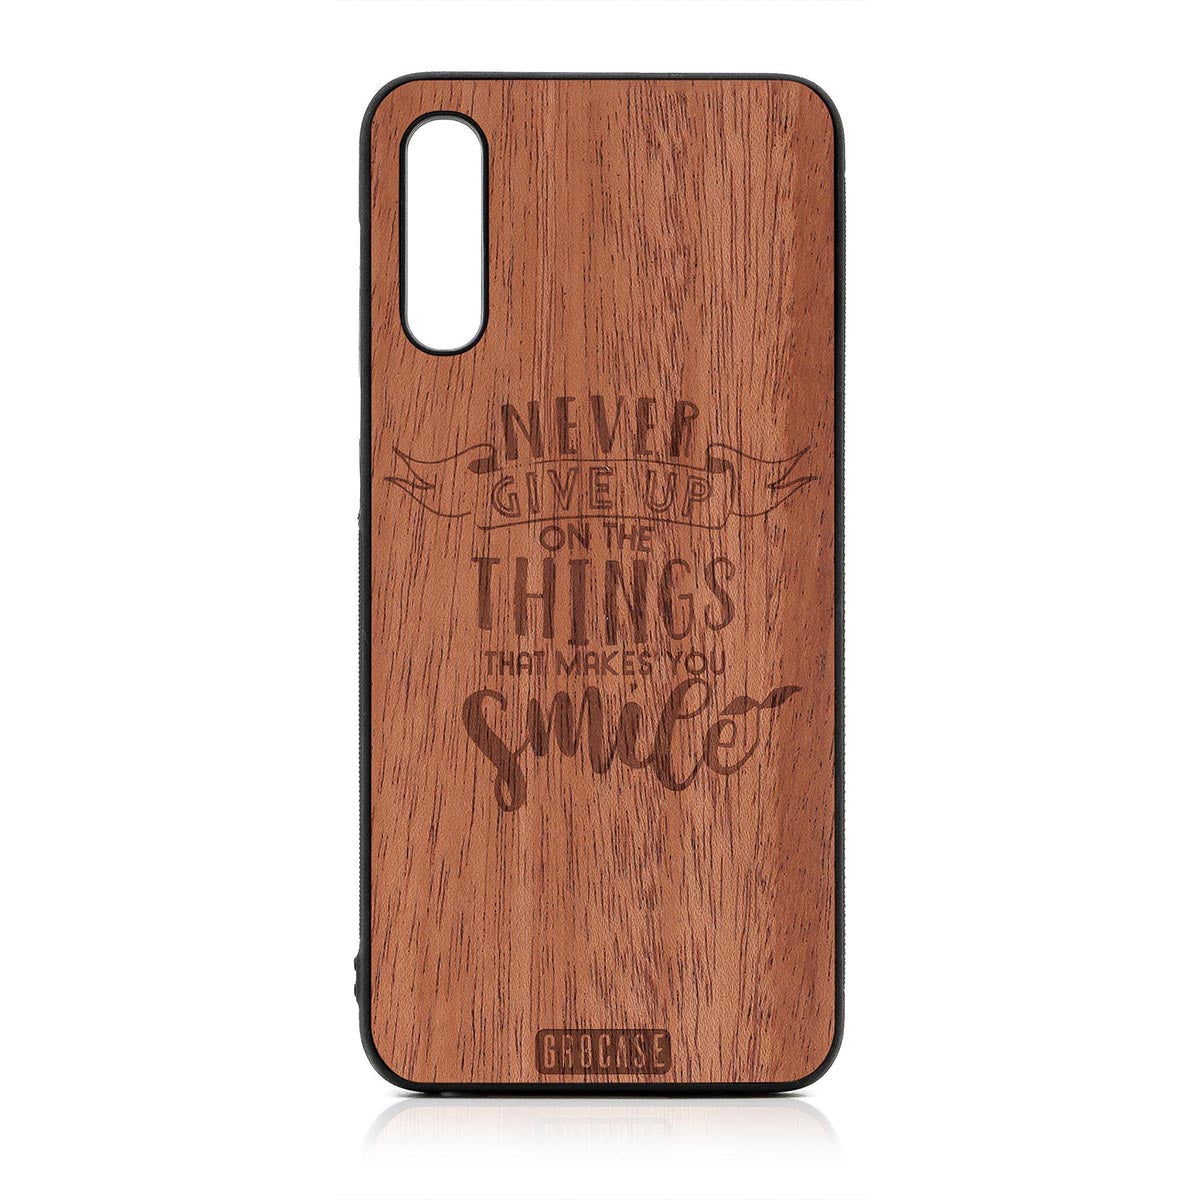 Never Give Up On The Things That Makes You Smile Design Wood Case For Samsung Galaxy A50 by GR8CASE